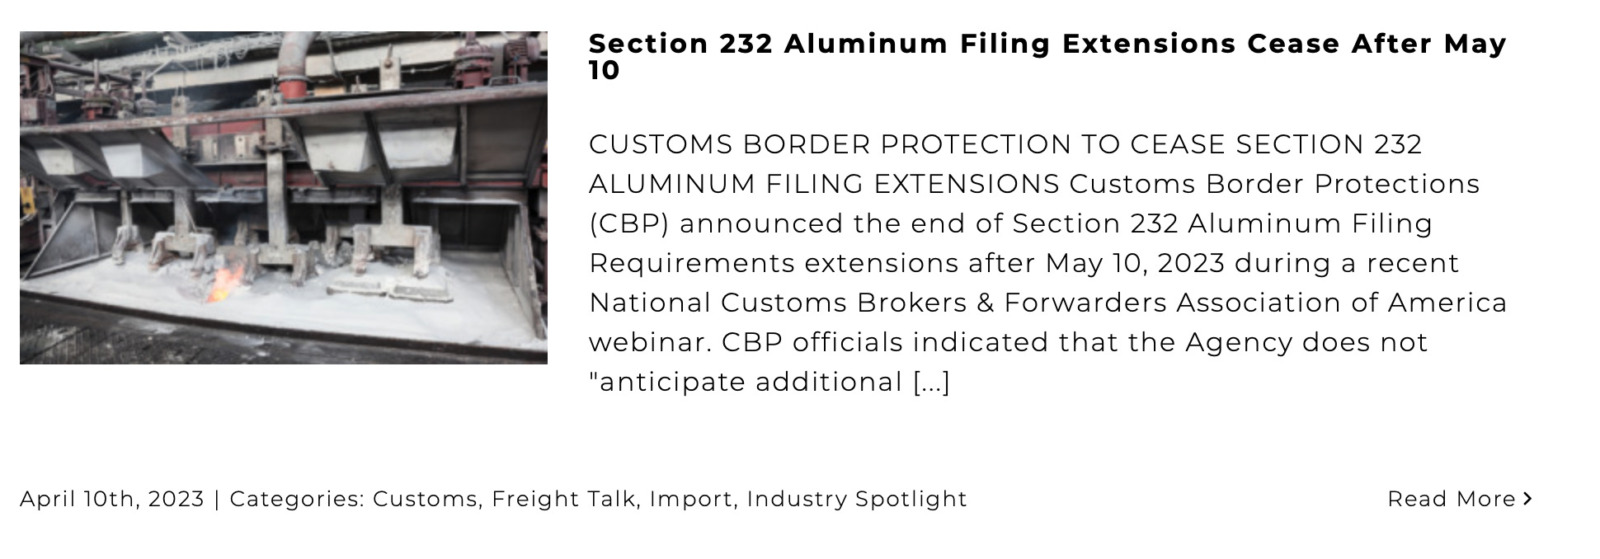 Section 232 Aluminum Filing Extensions Cease After May 10